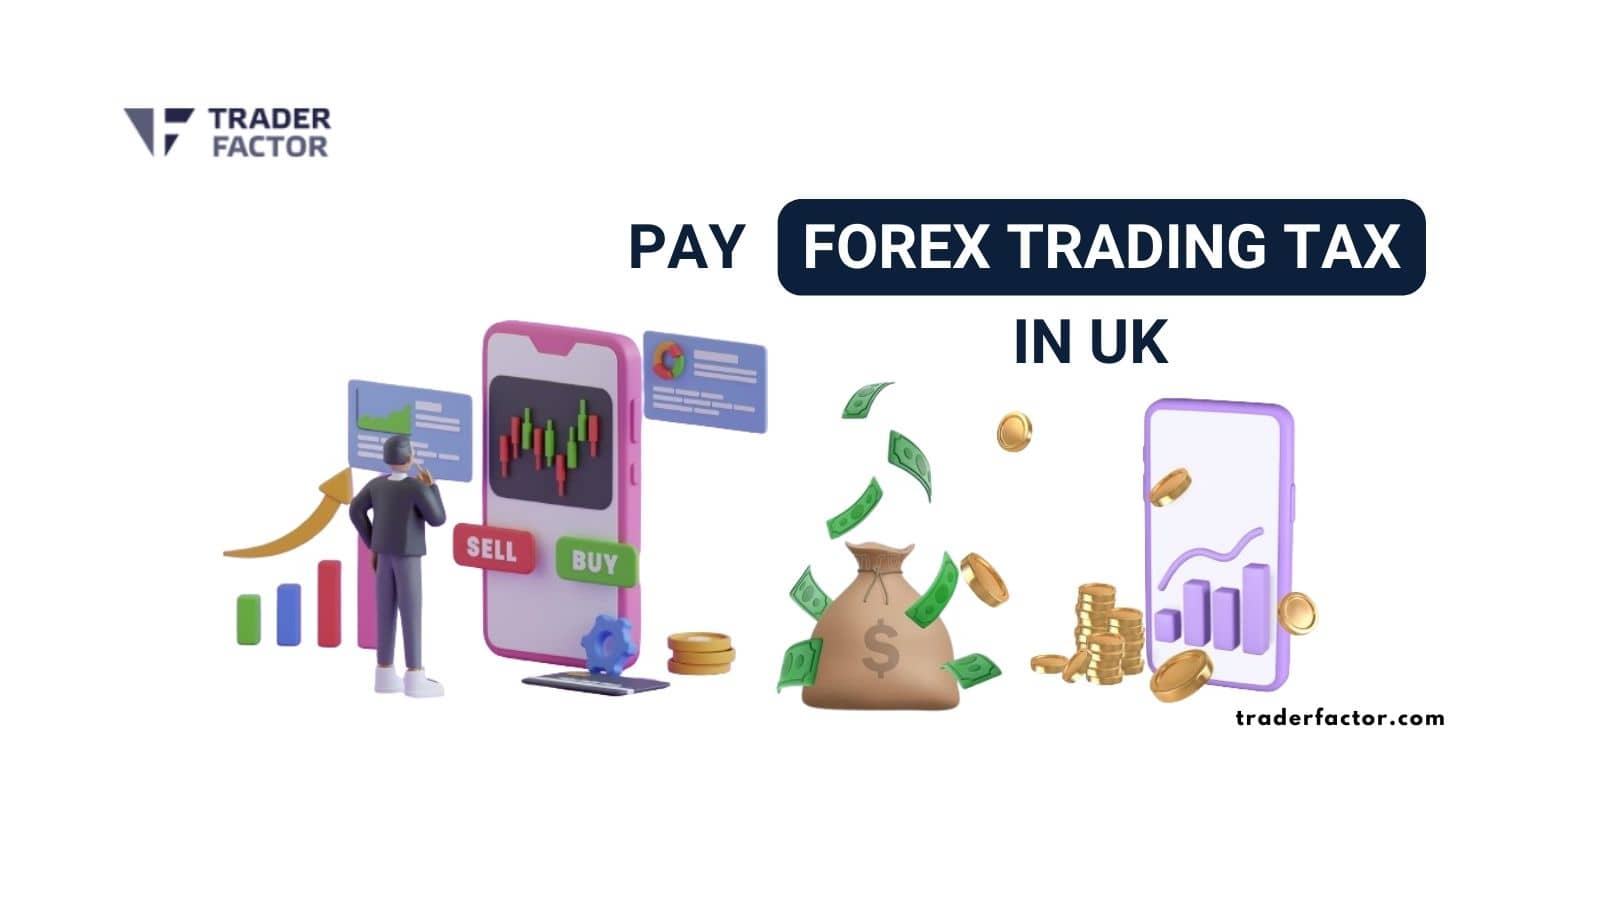 Pay forex trading tax in uk